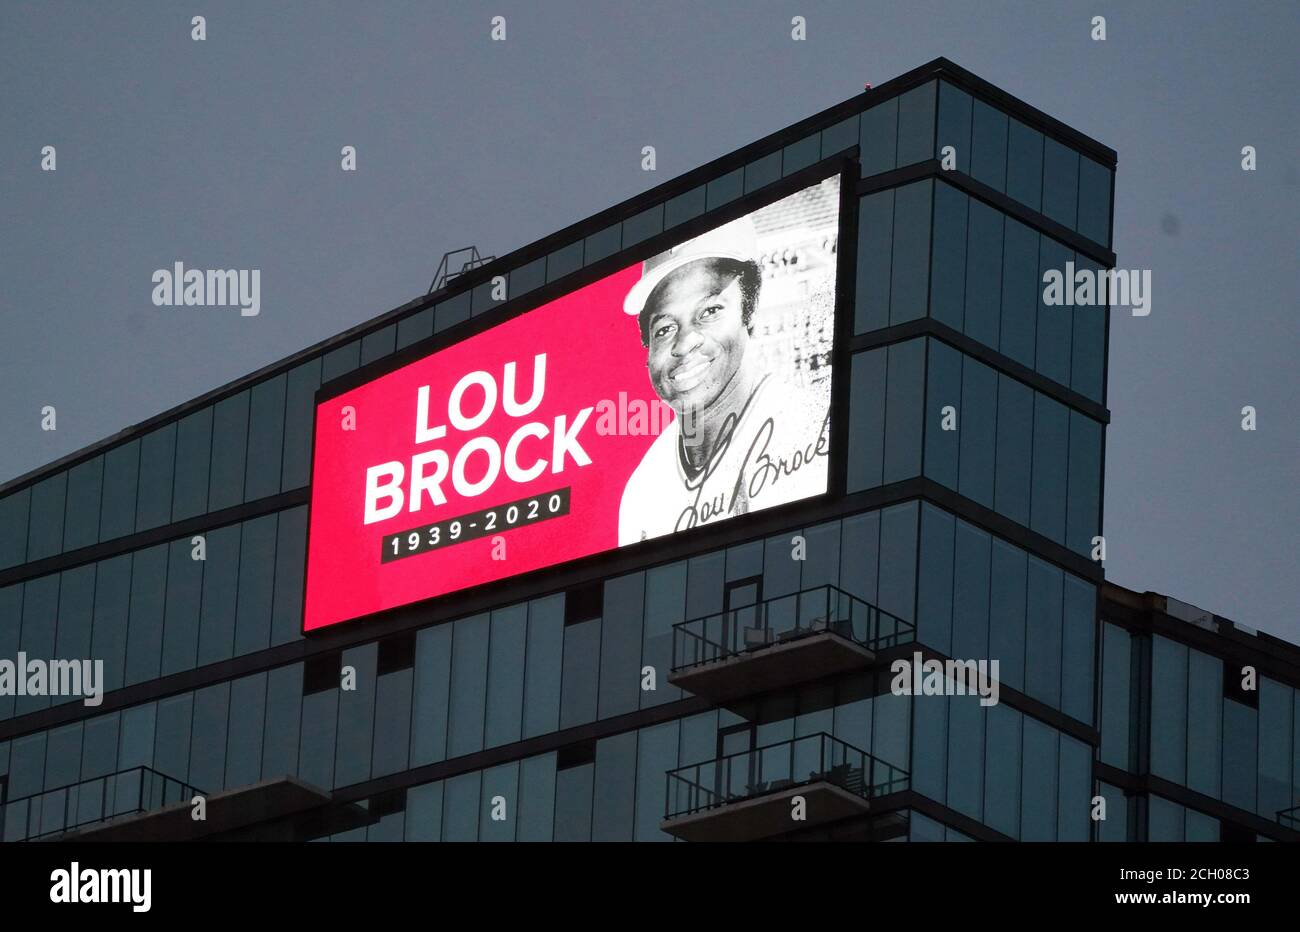 A memorial to Lou Brock, the former Cardinals player and member of the National Baseball Hall of Fame is displayed atop of One Cardinal Way, an apartment building across the street from Busch Stadium  in St. Louis on Saturday, September 12, 2020. Brock died on September 6, 2020 at the age of 81. Photo by Bill Greenblatt/UPI Stock Photo